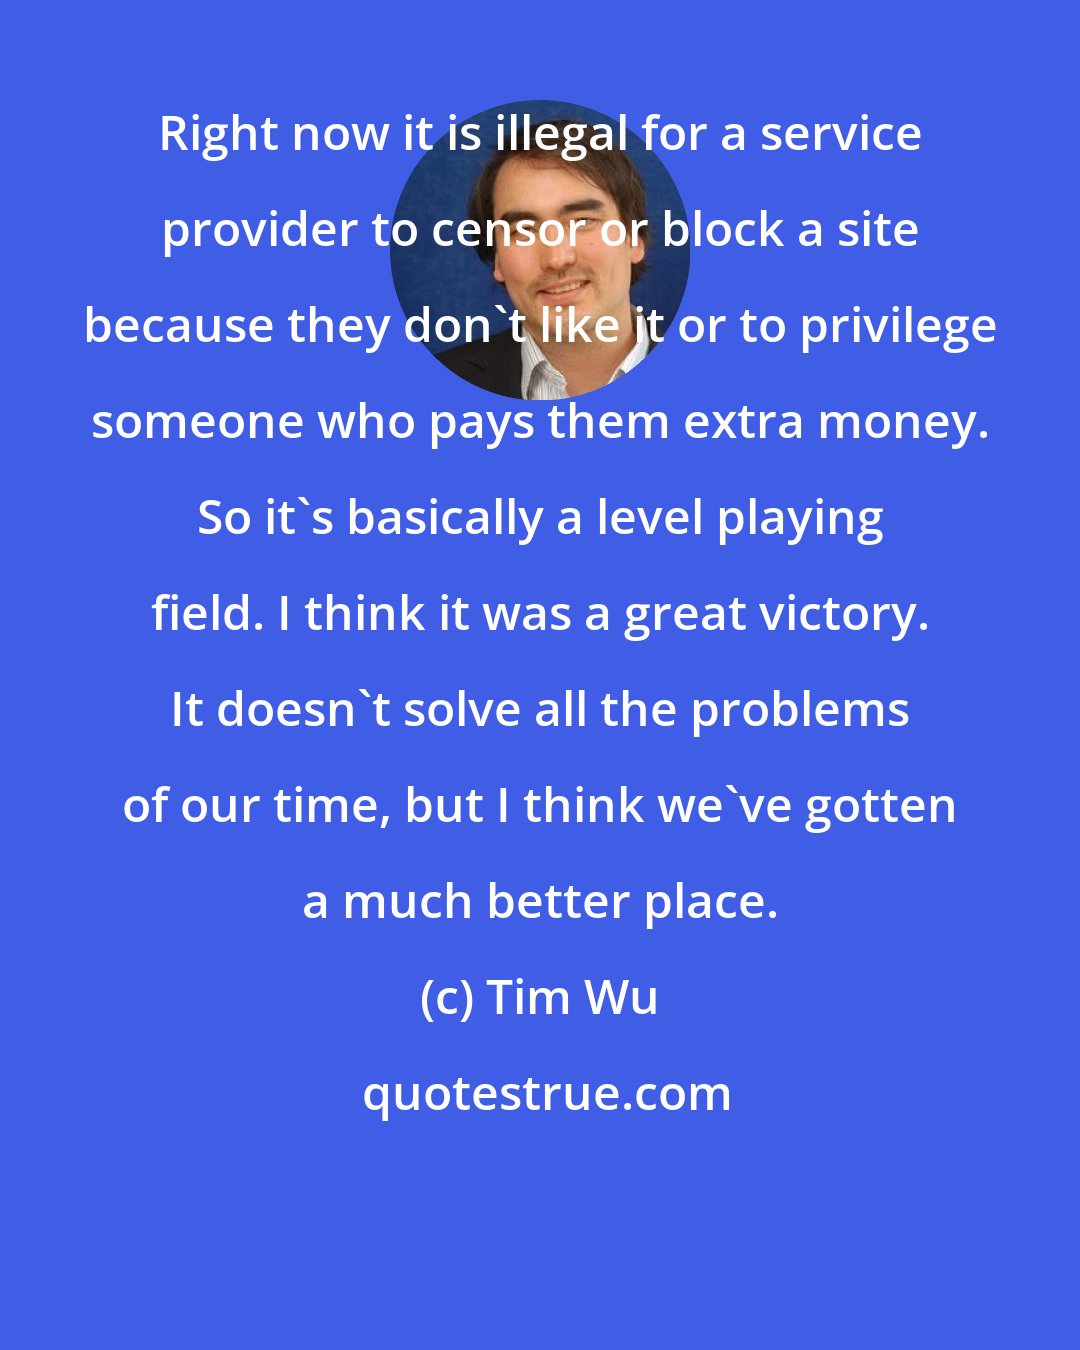 Tim Wu: Right now it is illegal for a service provider to censor or block a site because they don't like it or to privilege someone who pays them extra money. So it's basically a level playing field. I think it was a great victory. It doesn't solve all the problems of our time, but I think we've gotten a much better place.